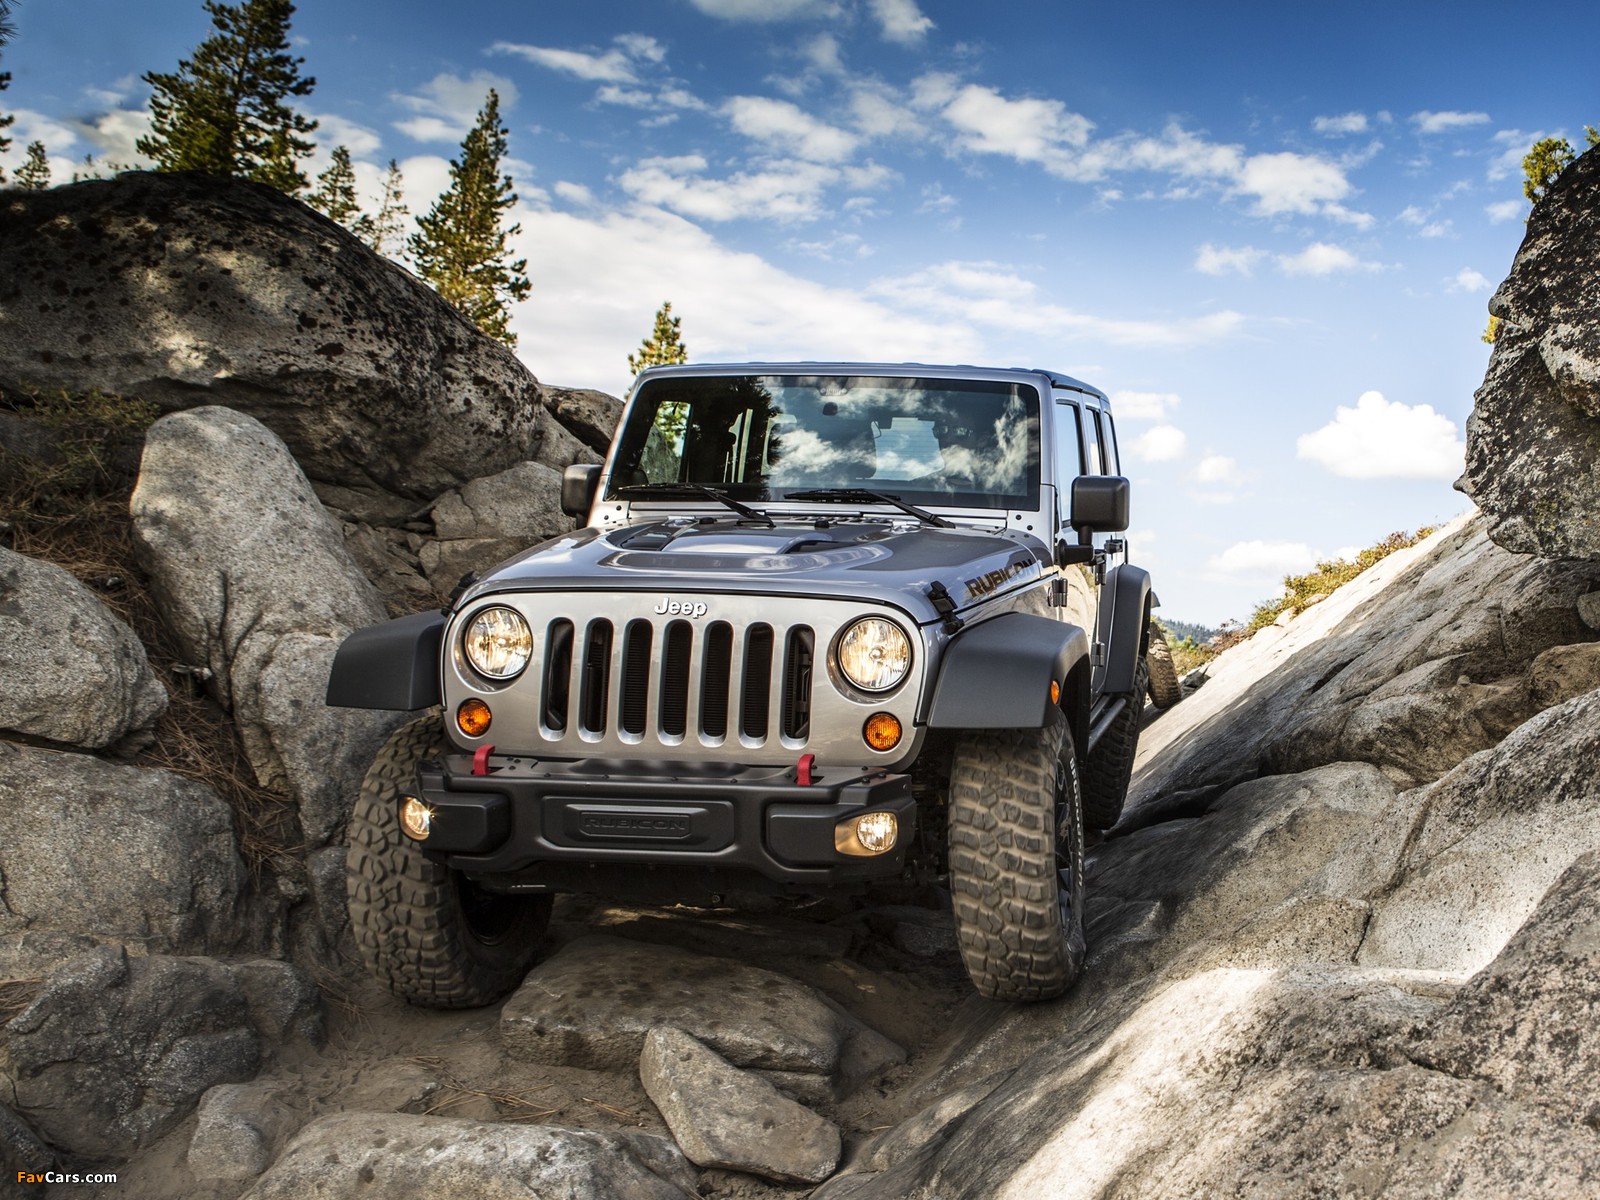 Jeep Wrangler Unlimited Rubicon 10th Anniversary (JK) 2013 images (1600 x 1200)